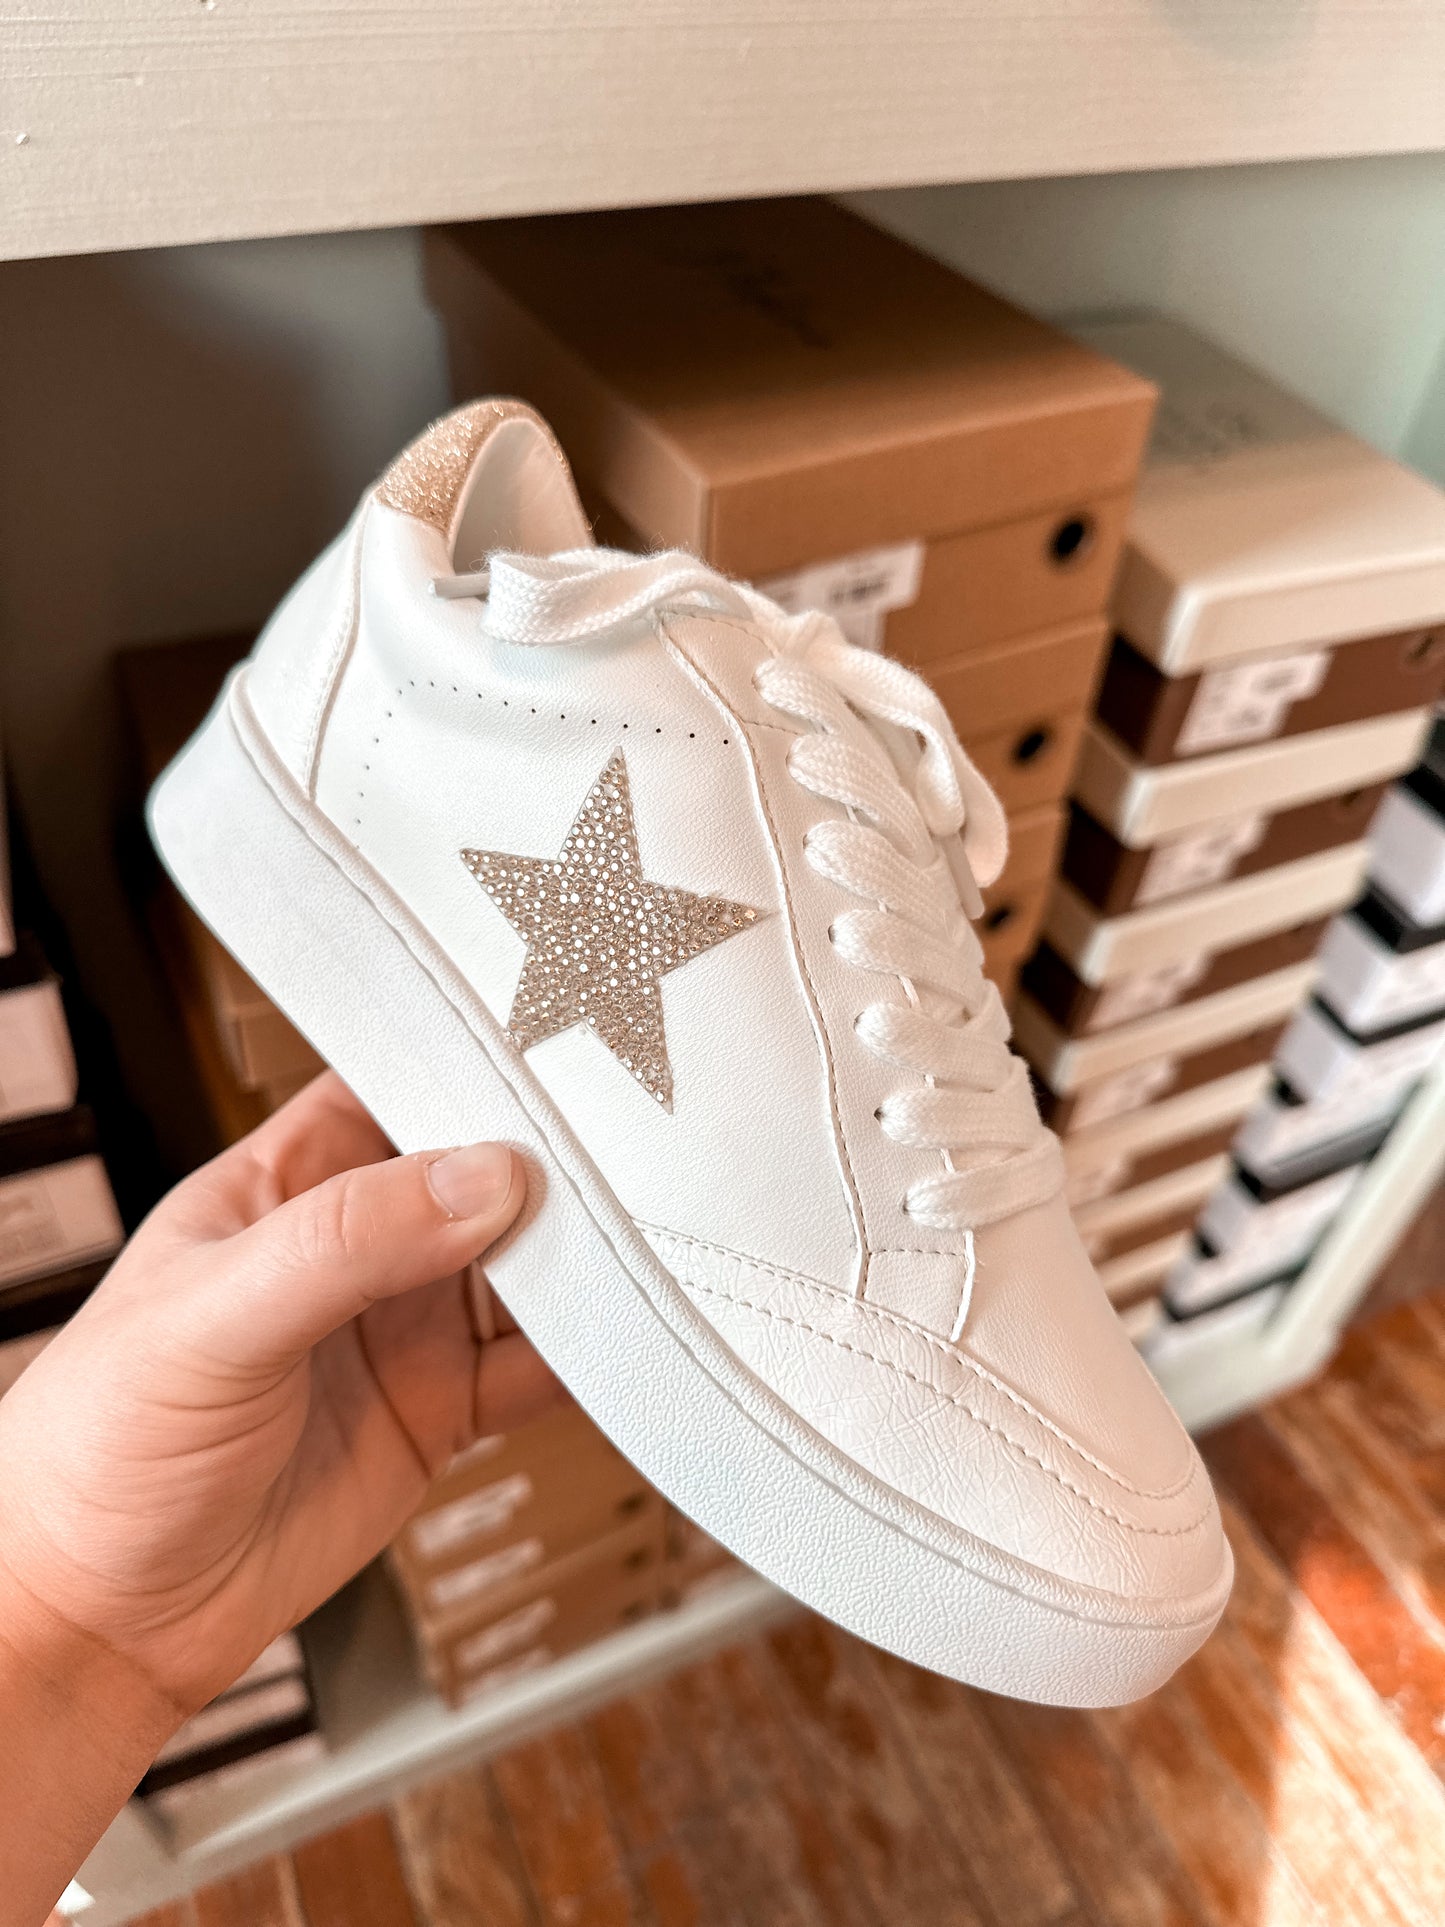 Gold Star Sneakers